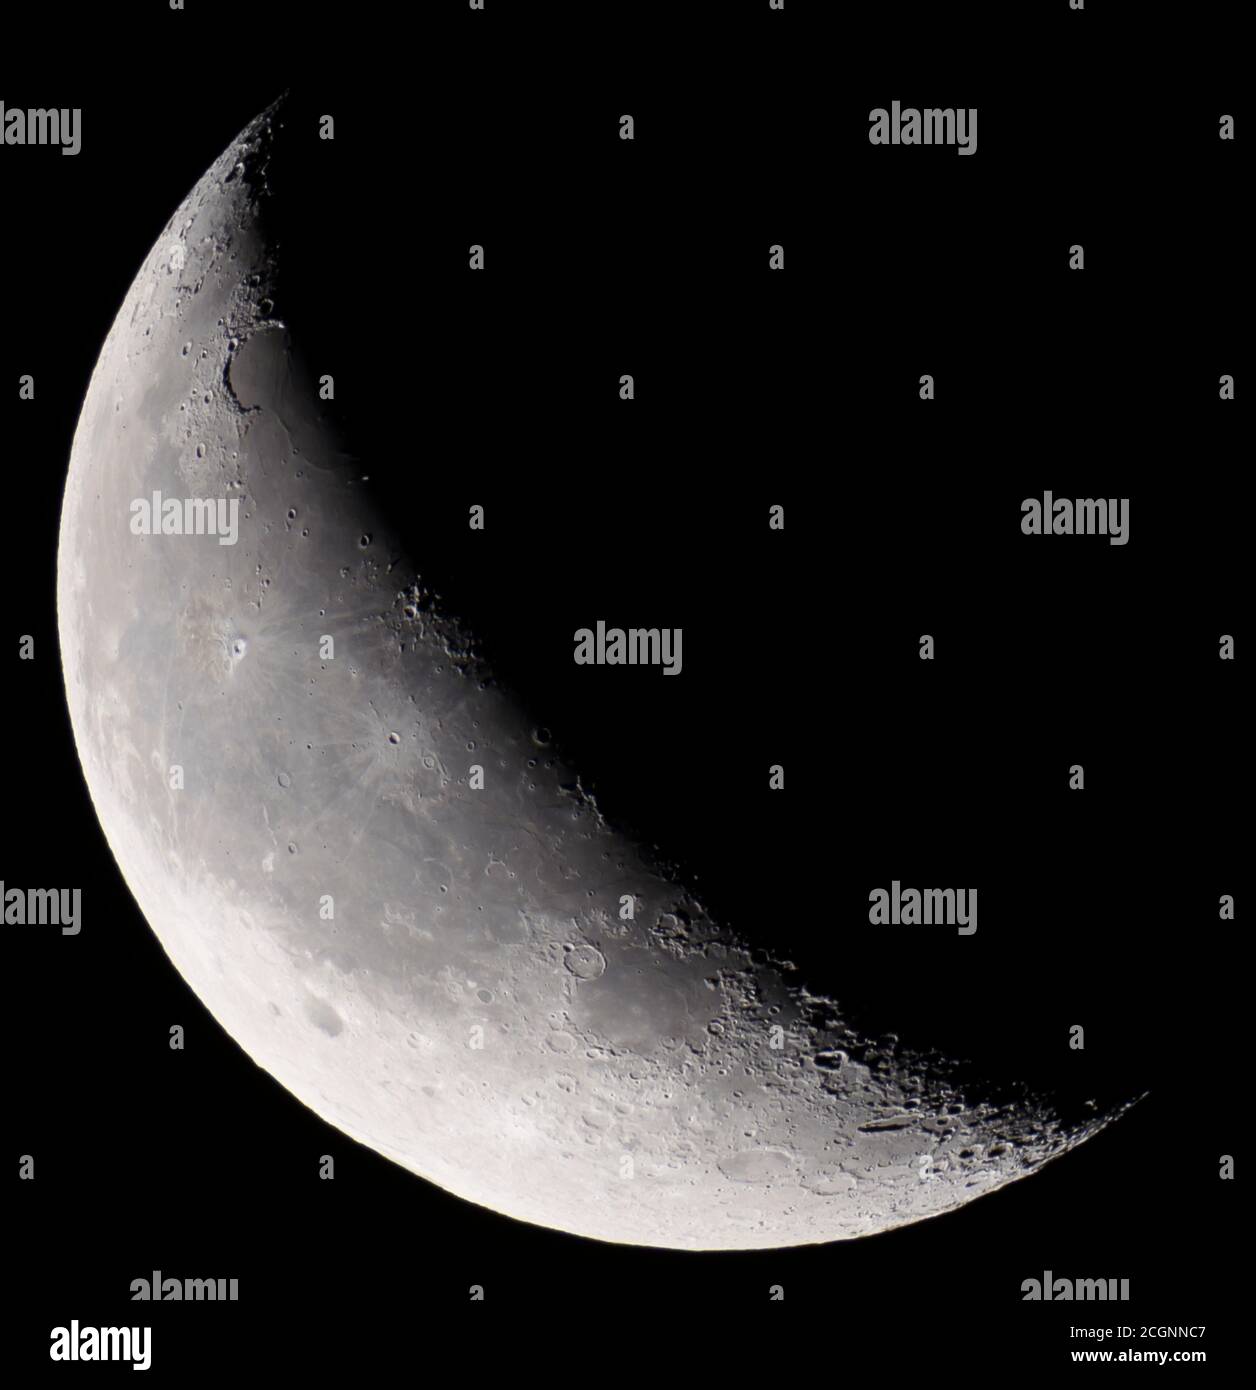 London, UK. 12 September 2020. Telescope image of 39% illuminated waning crescent Moon, photographed in the early hours of 12th September. Credit: Malcolm Park/Alamy Stock Photo